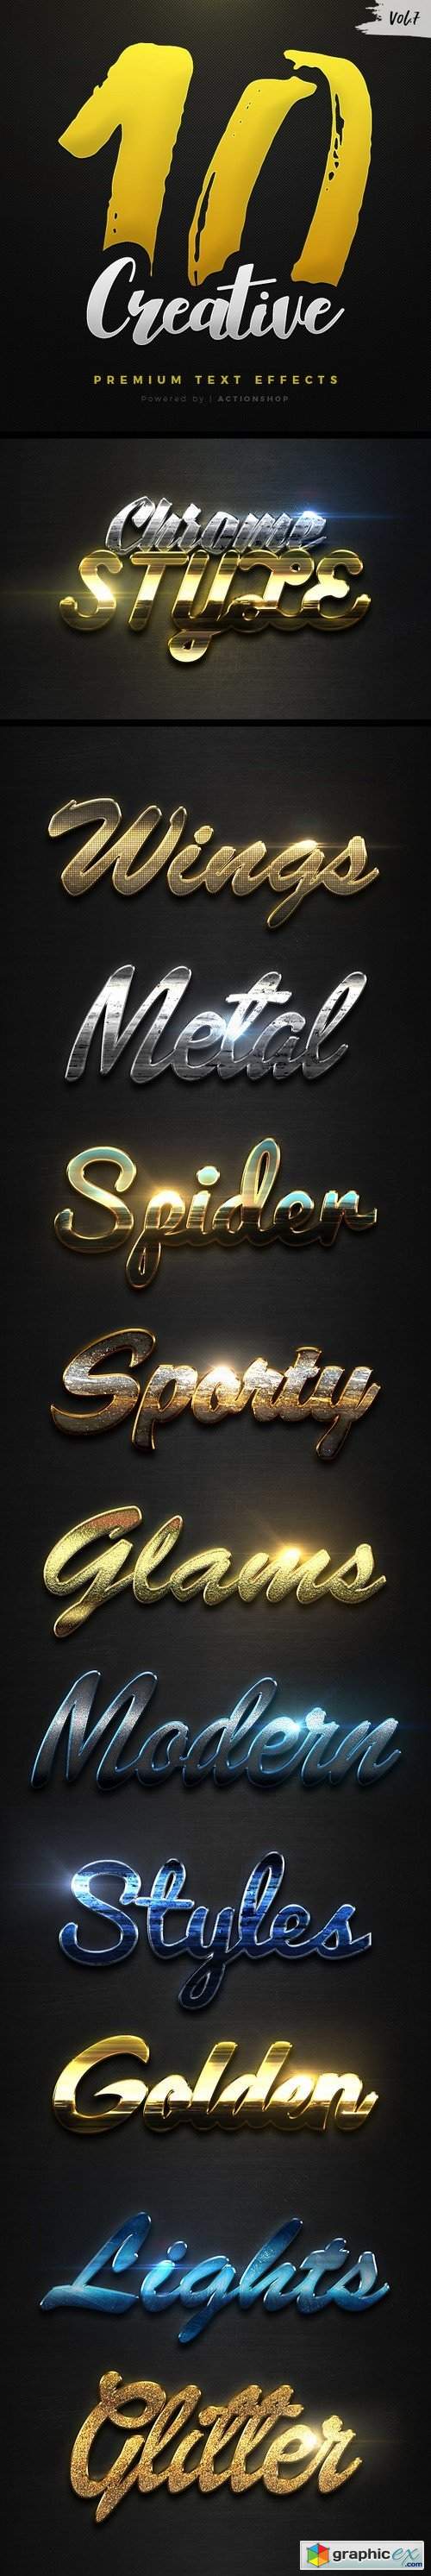 10 Creative Text Effects Vol.7